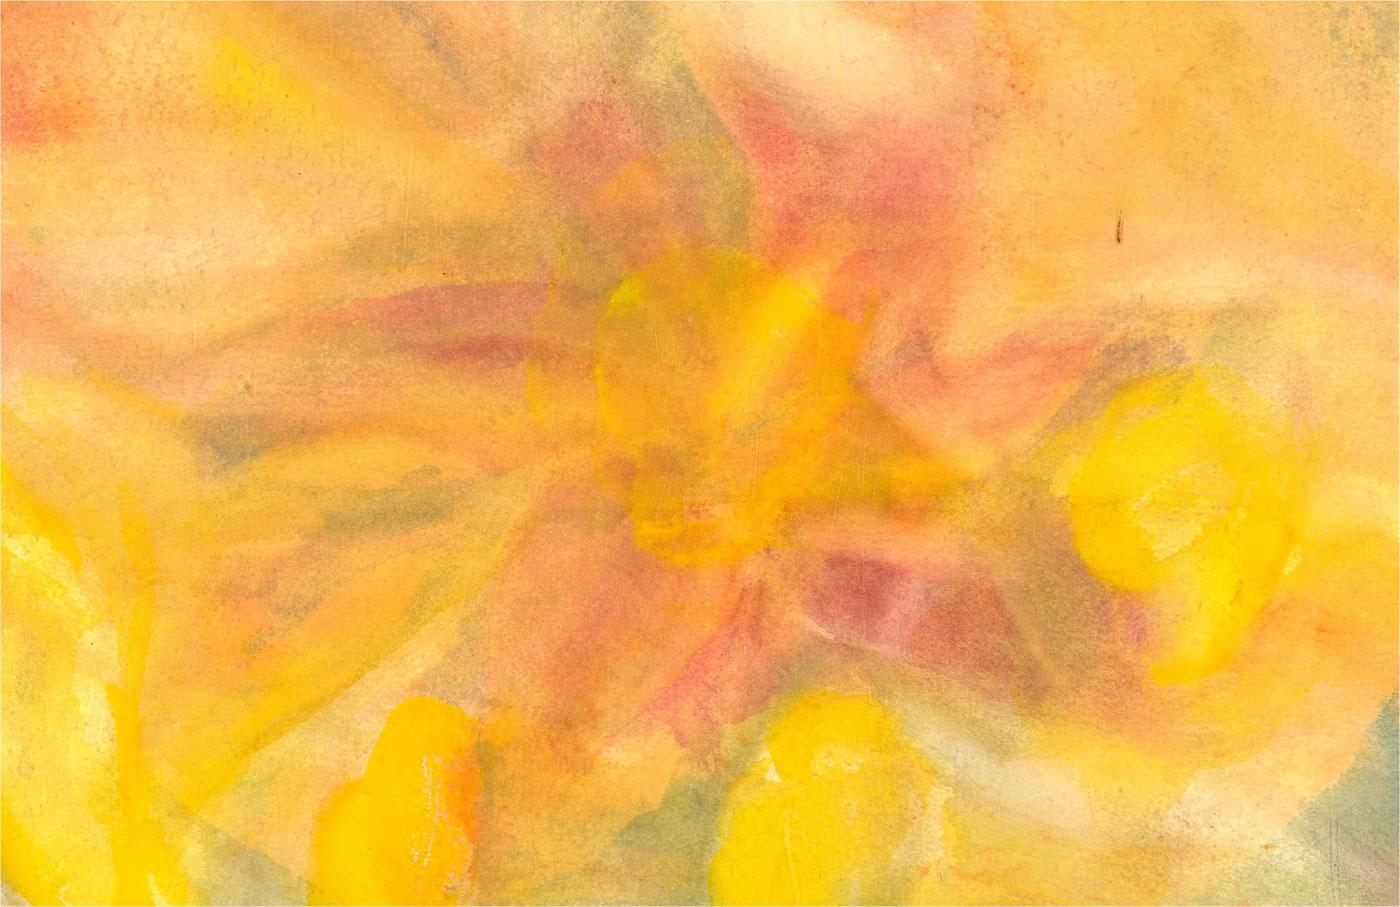 Watercolours abstractly render a flower in a composition beaming with bright yellow light.

The artwork is unsigned.

On wove.